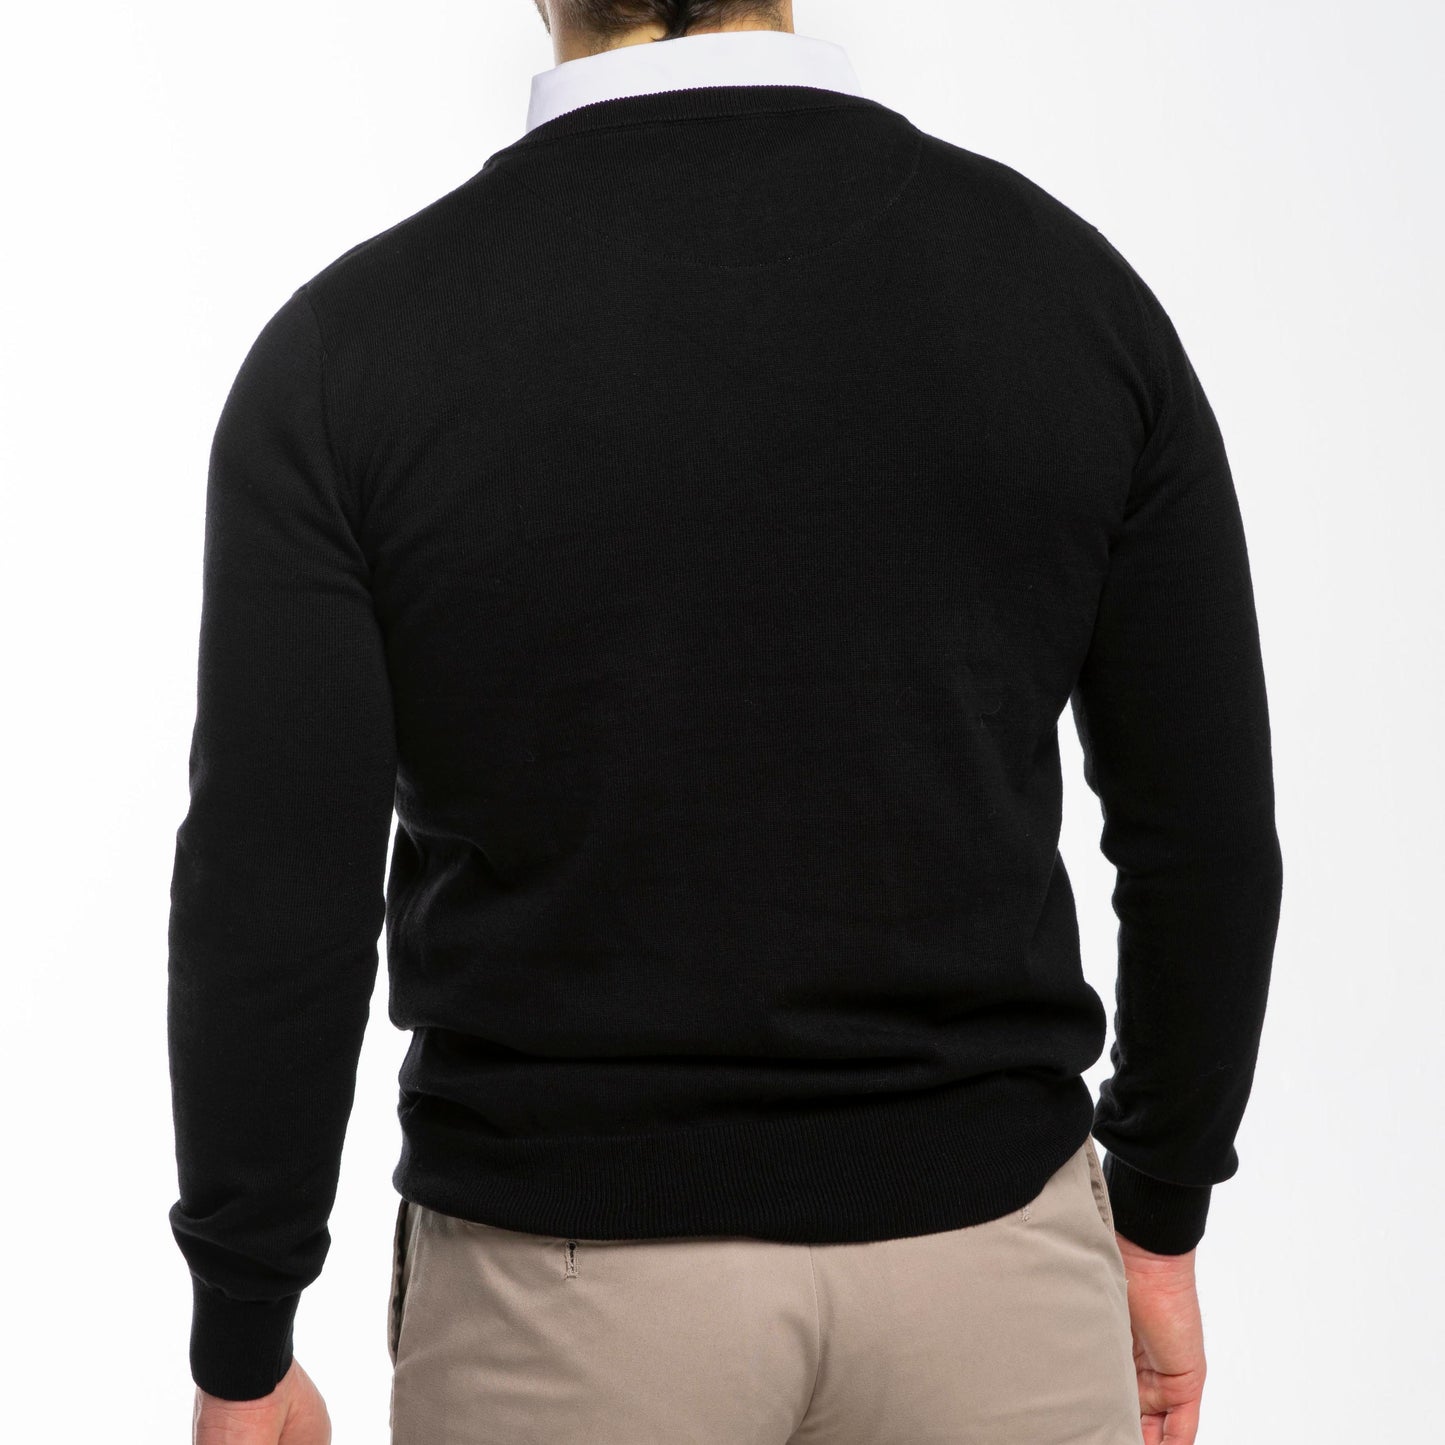 Classic Black Sweater with White Collar – Flying Point Apparel